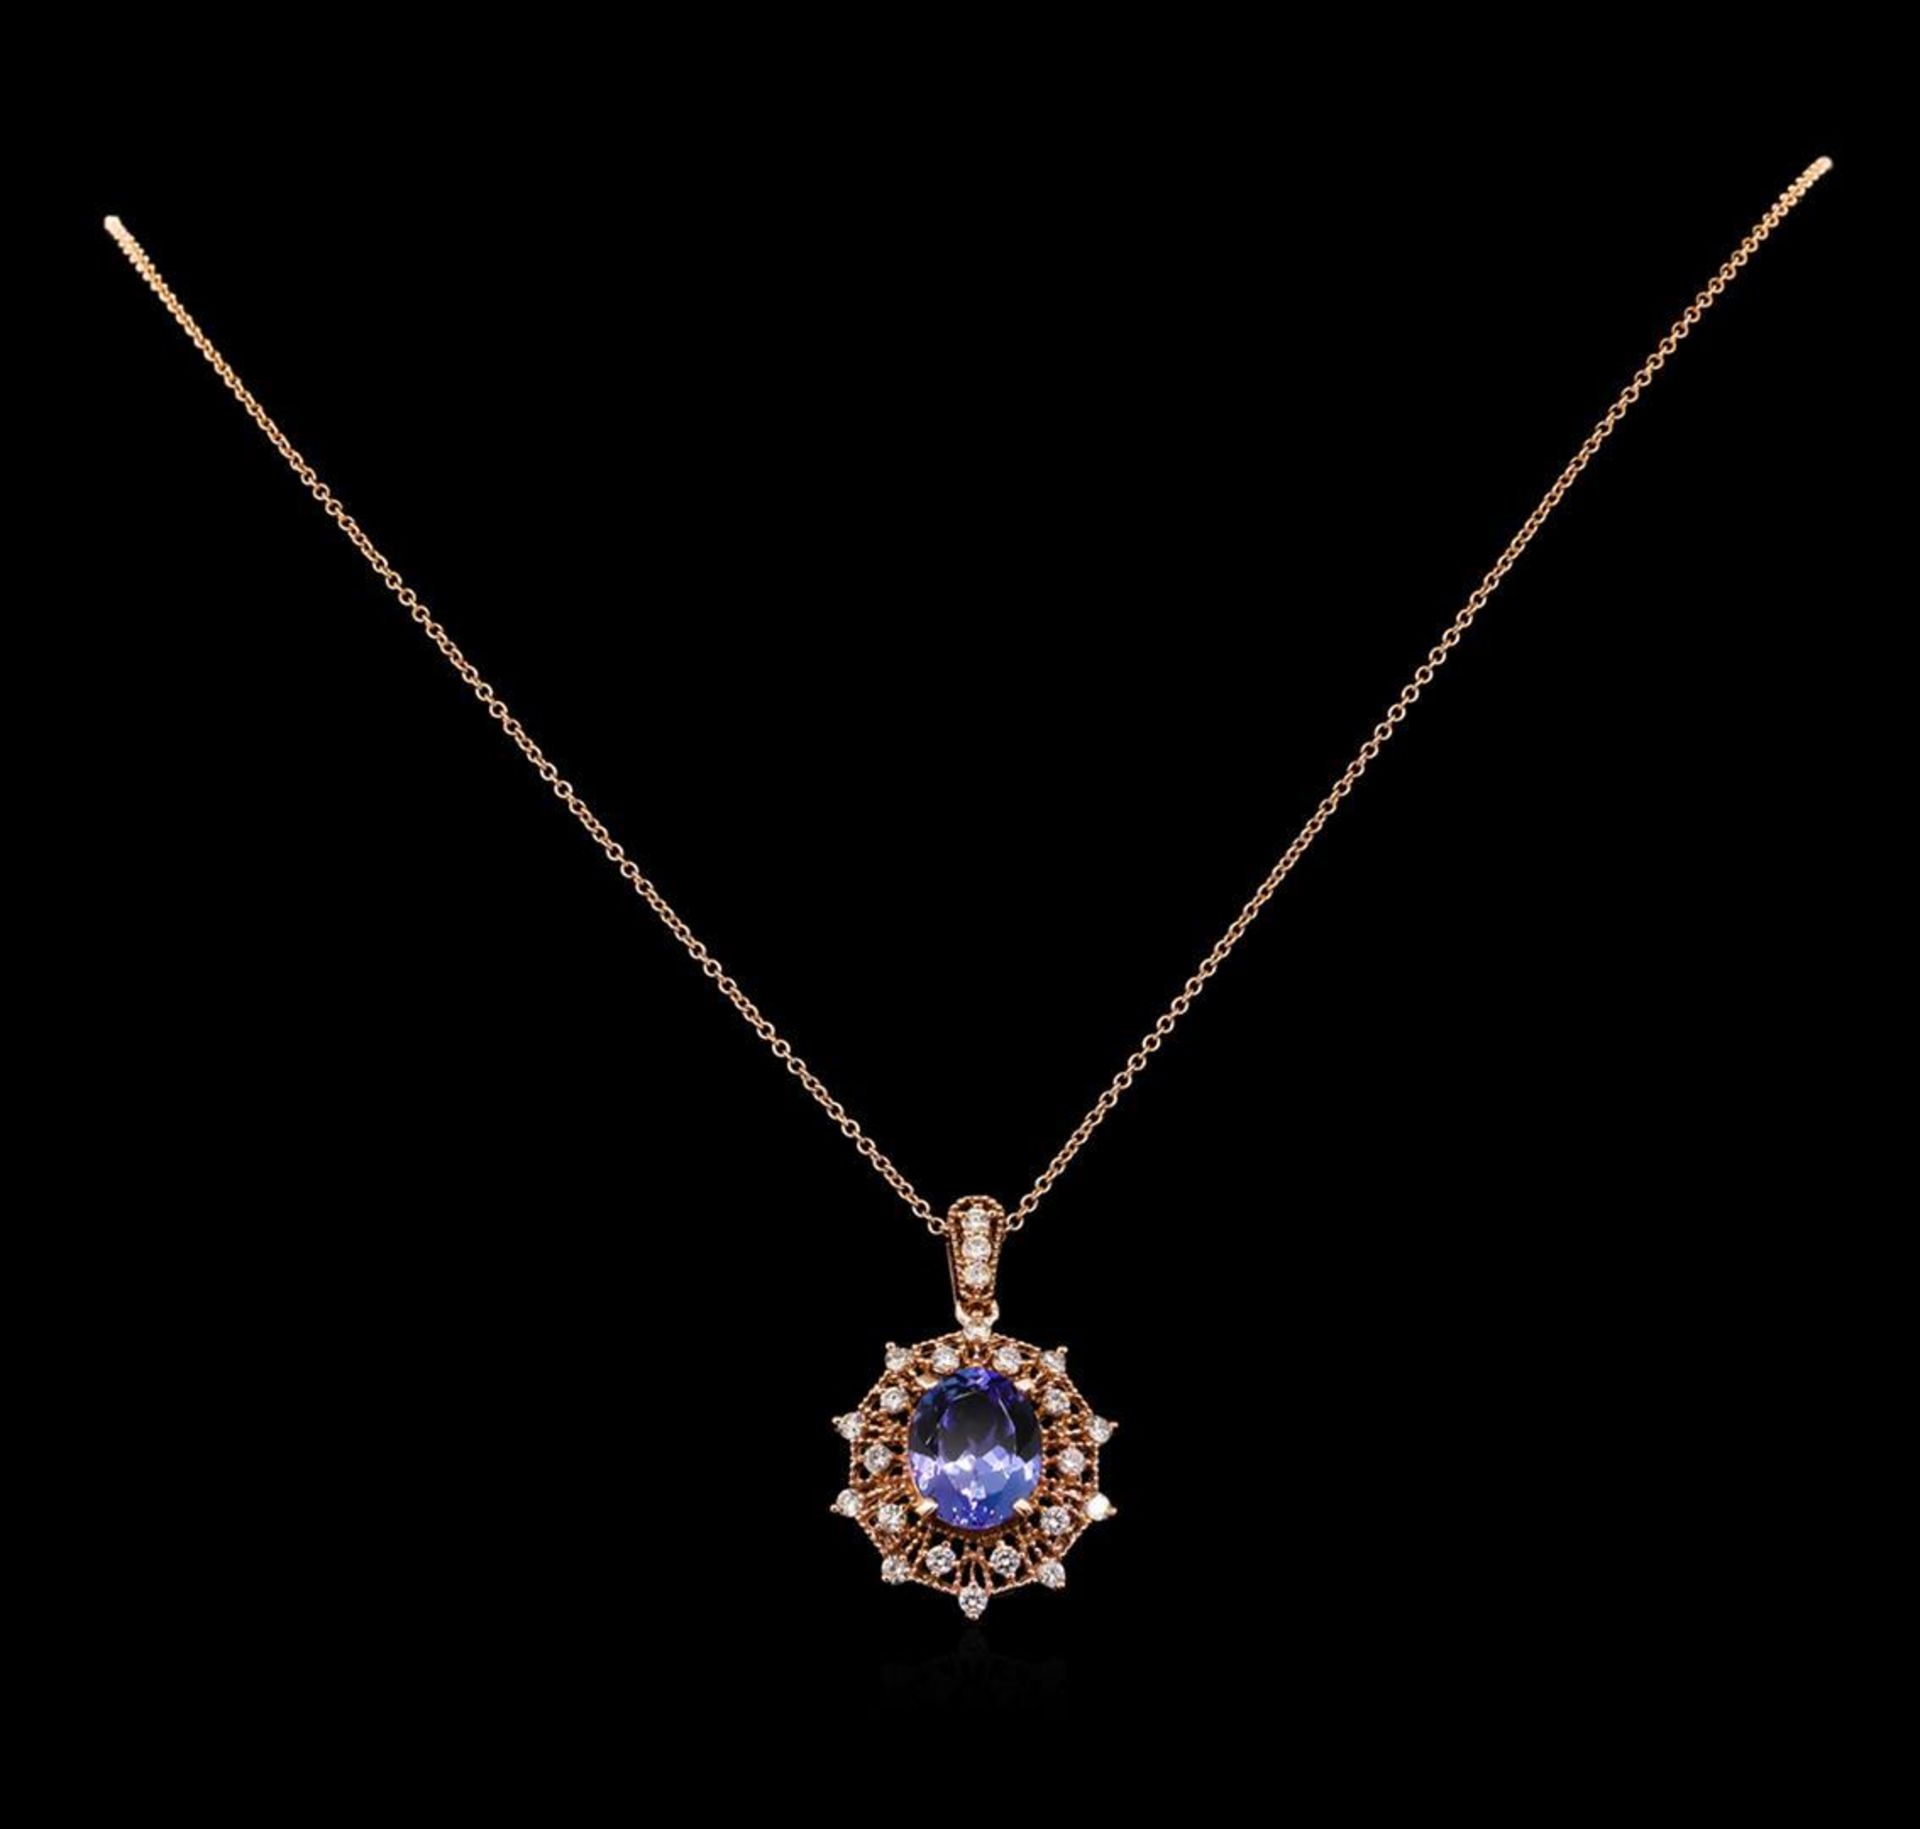 3.95ct Tanzanite and Diamond Pendant With Chain - 14KT Rose Gold - Image 2 of 3